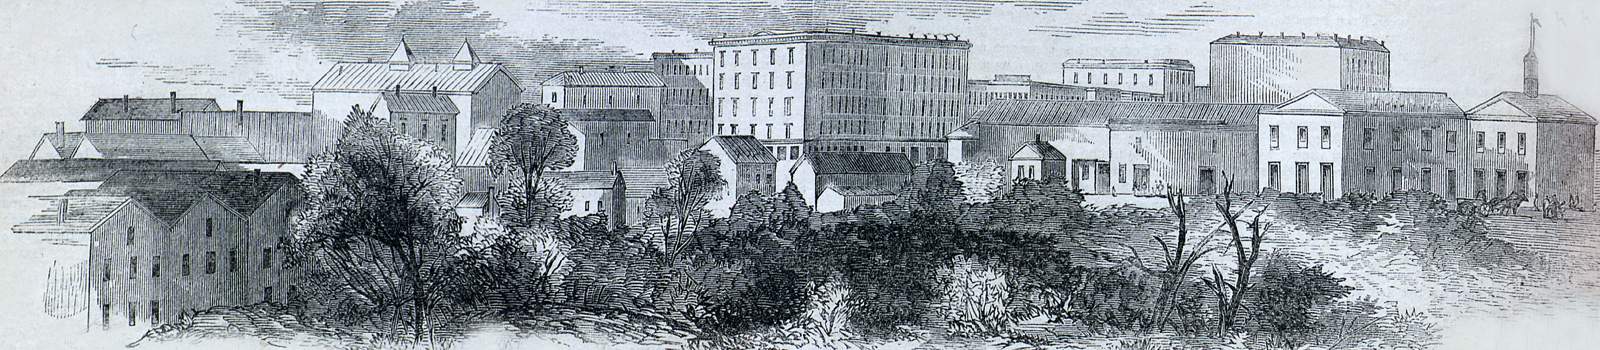 Houston, Texas, October 1866, artist's impression, zoomable image.